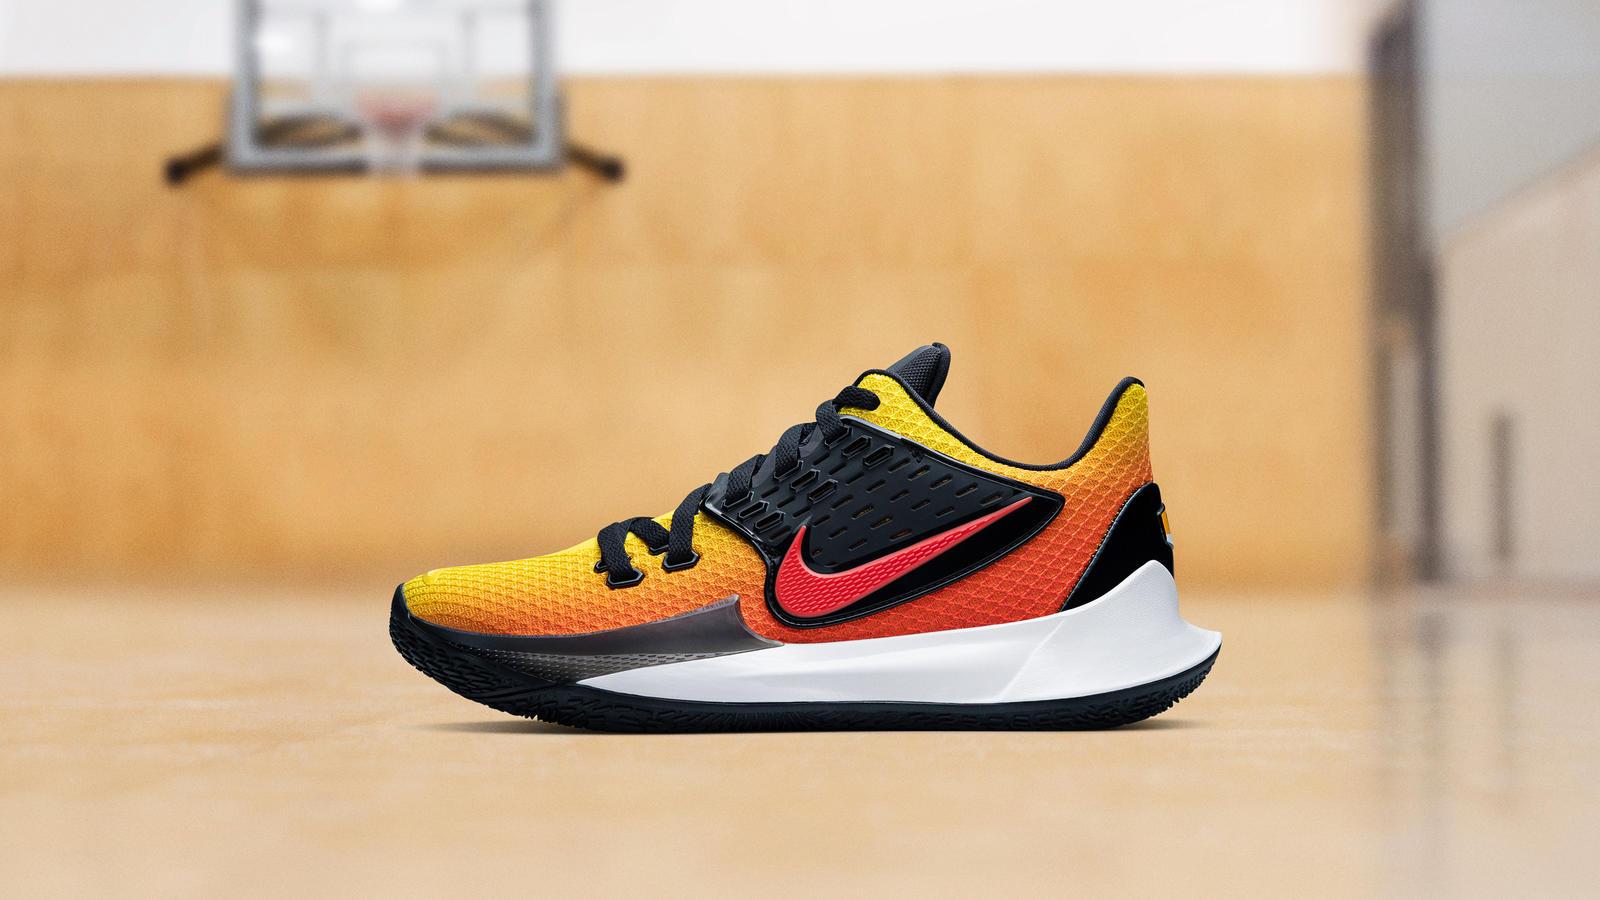 Nike Kyrie Low 2 Team Orange Official Image and Release